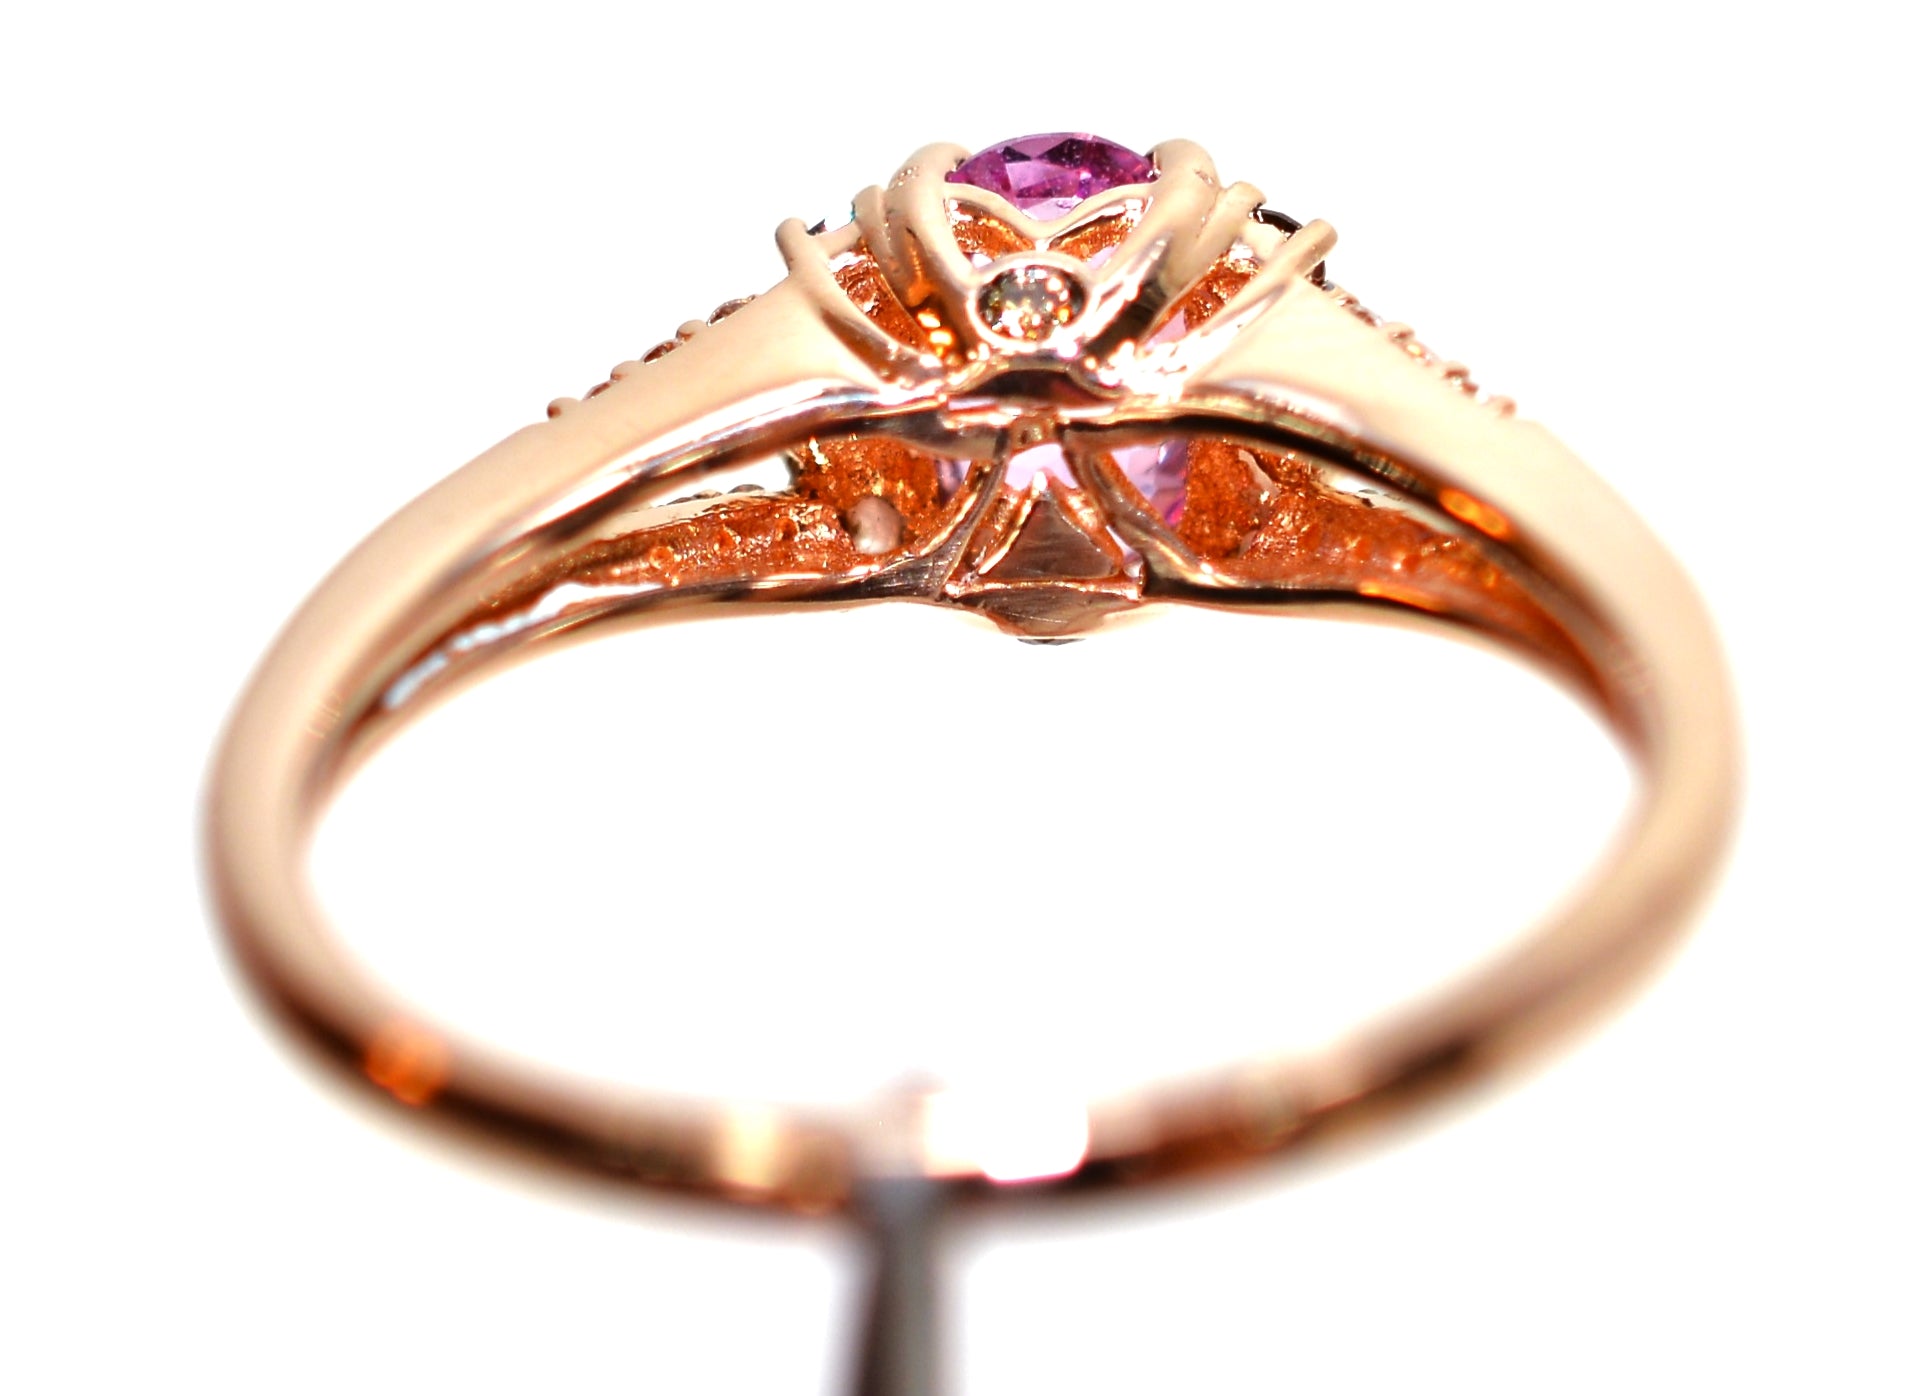 LeVian Natural Padparadscha Sapphire & Chocolate Diamond Ring 14K Rose Gold Ring .93tcw Engagement Ring Sapphire Ring Pink Ring LeVian Ring